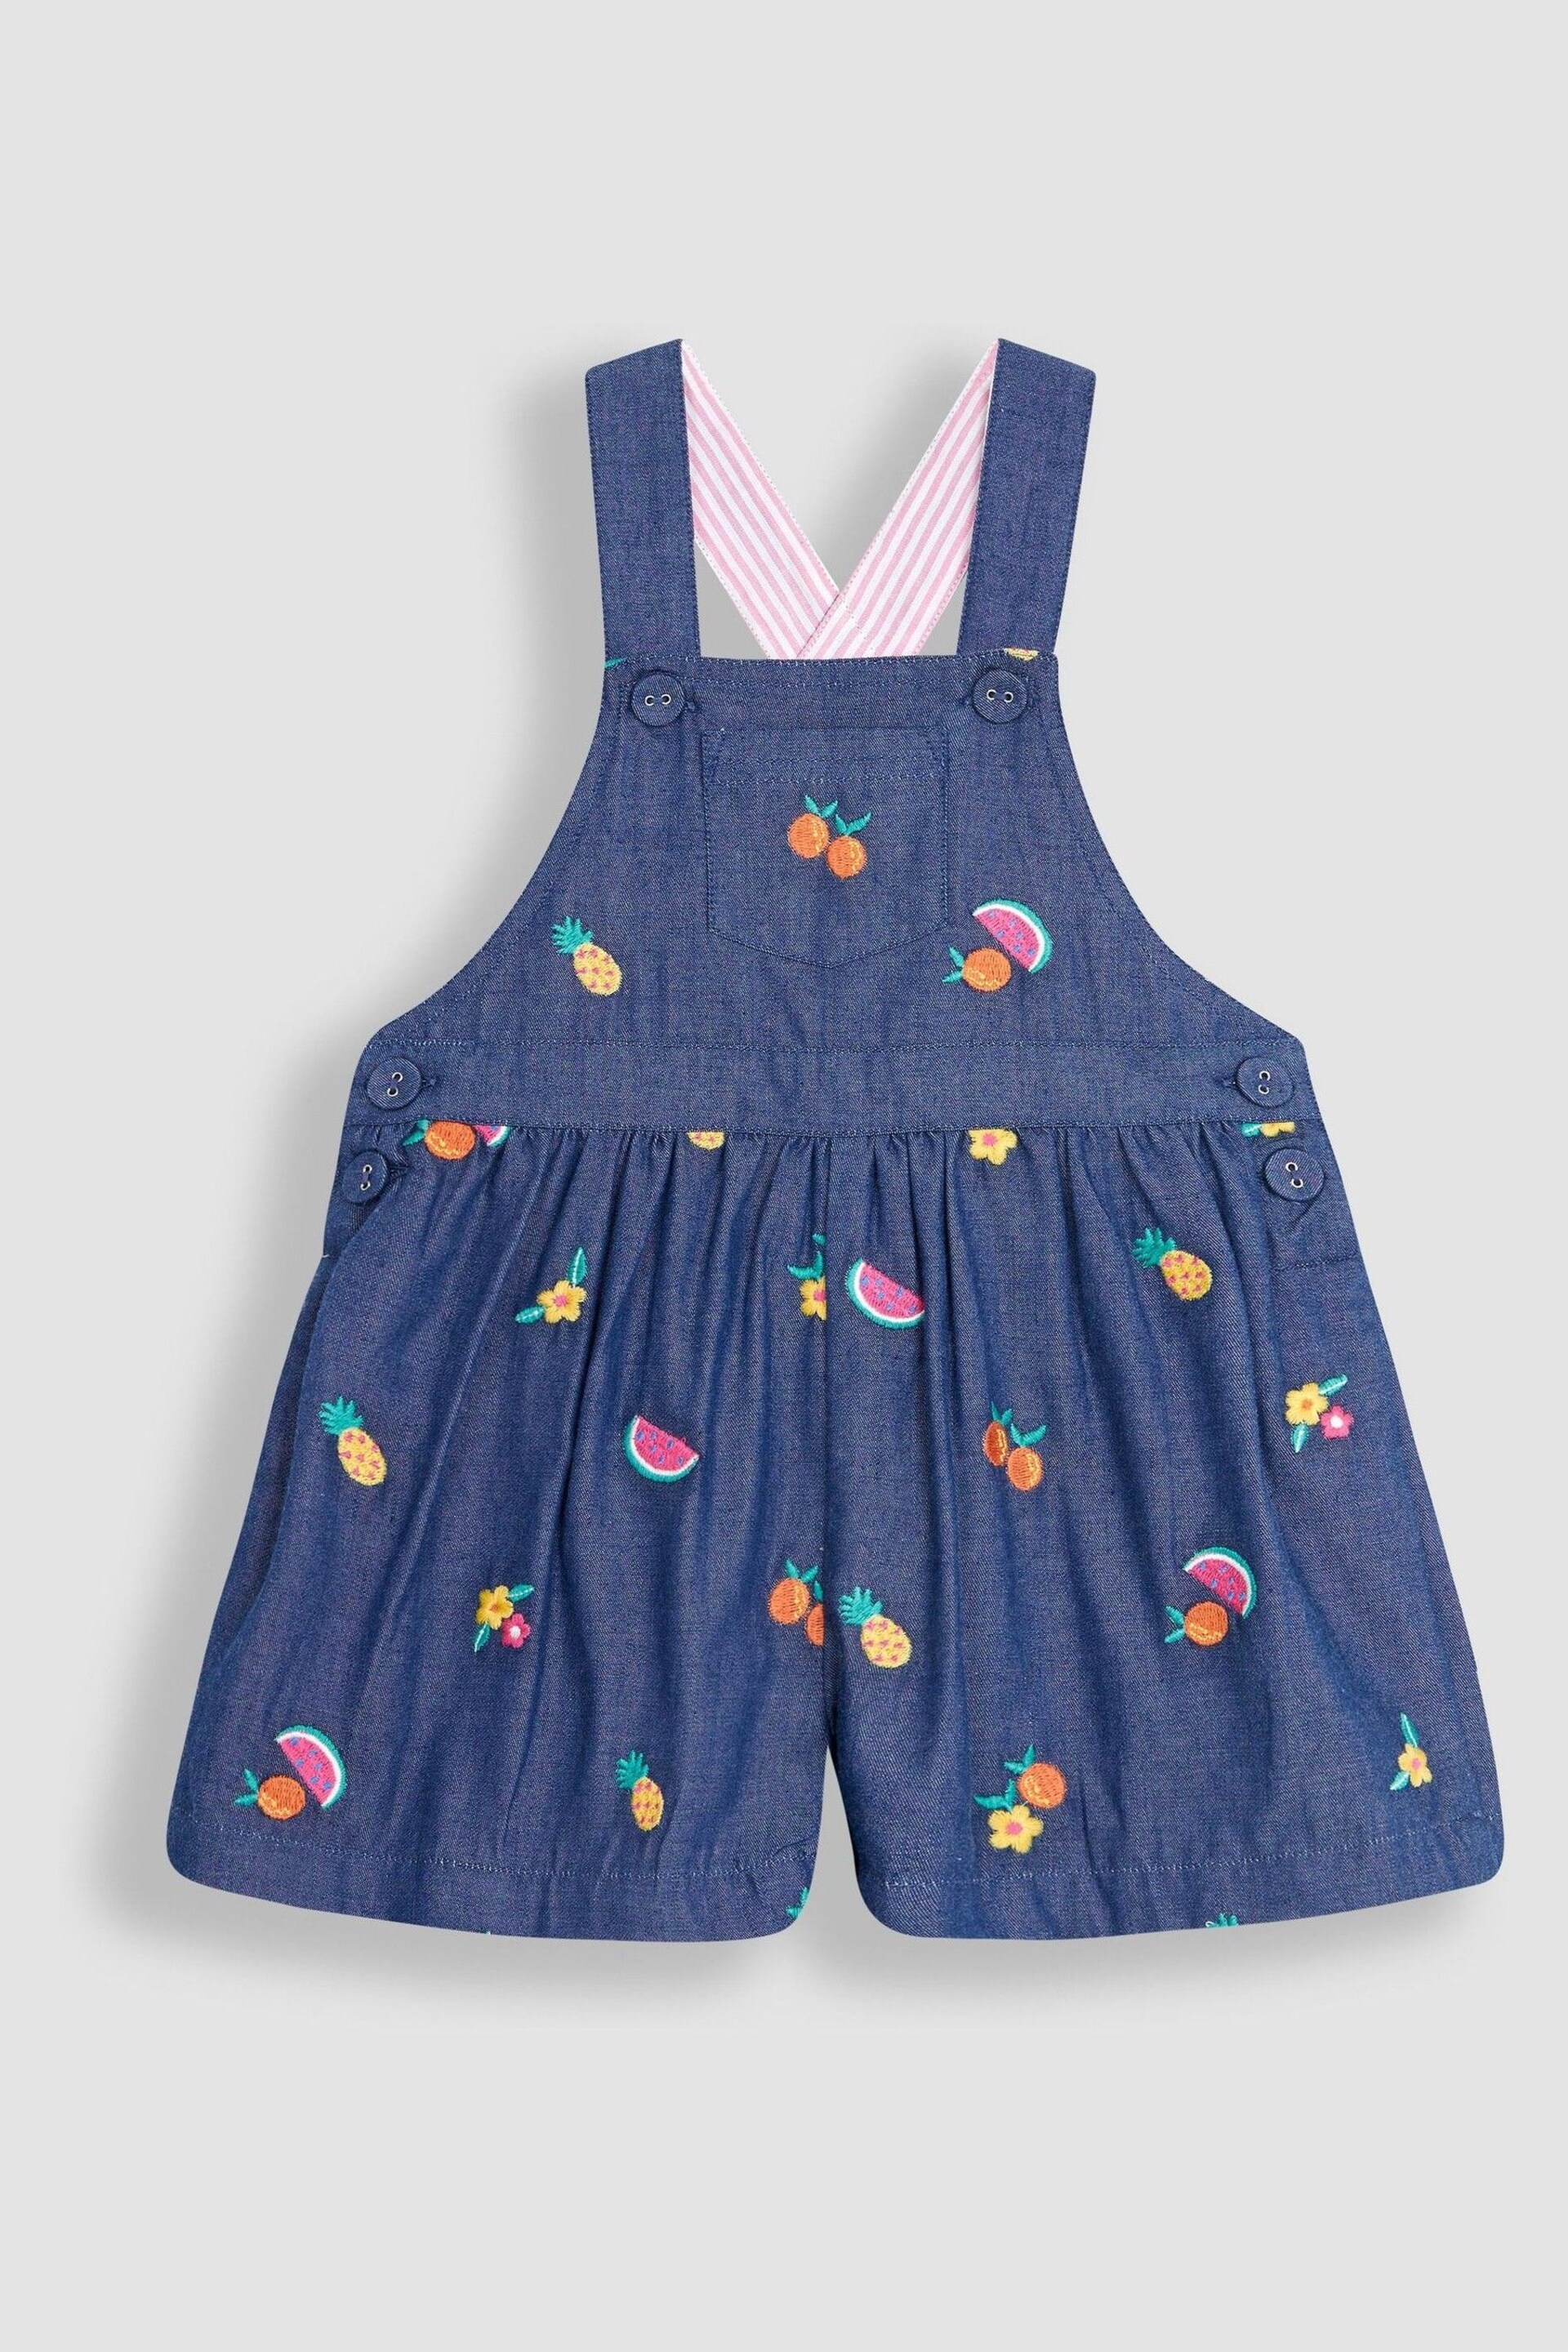 JoJo Maman Bébé Chambray Summer Fruits Embroidered Culotte Dungarees - Image 1 of 3